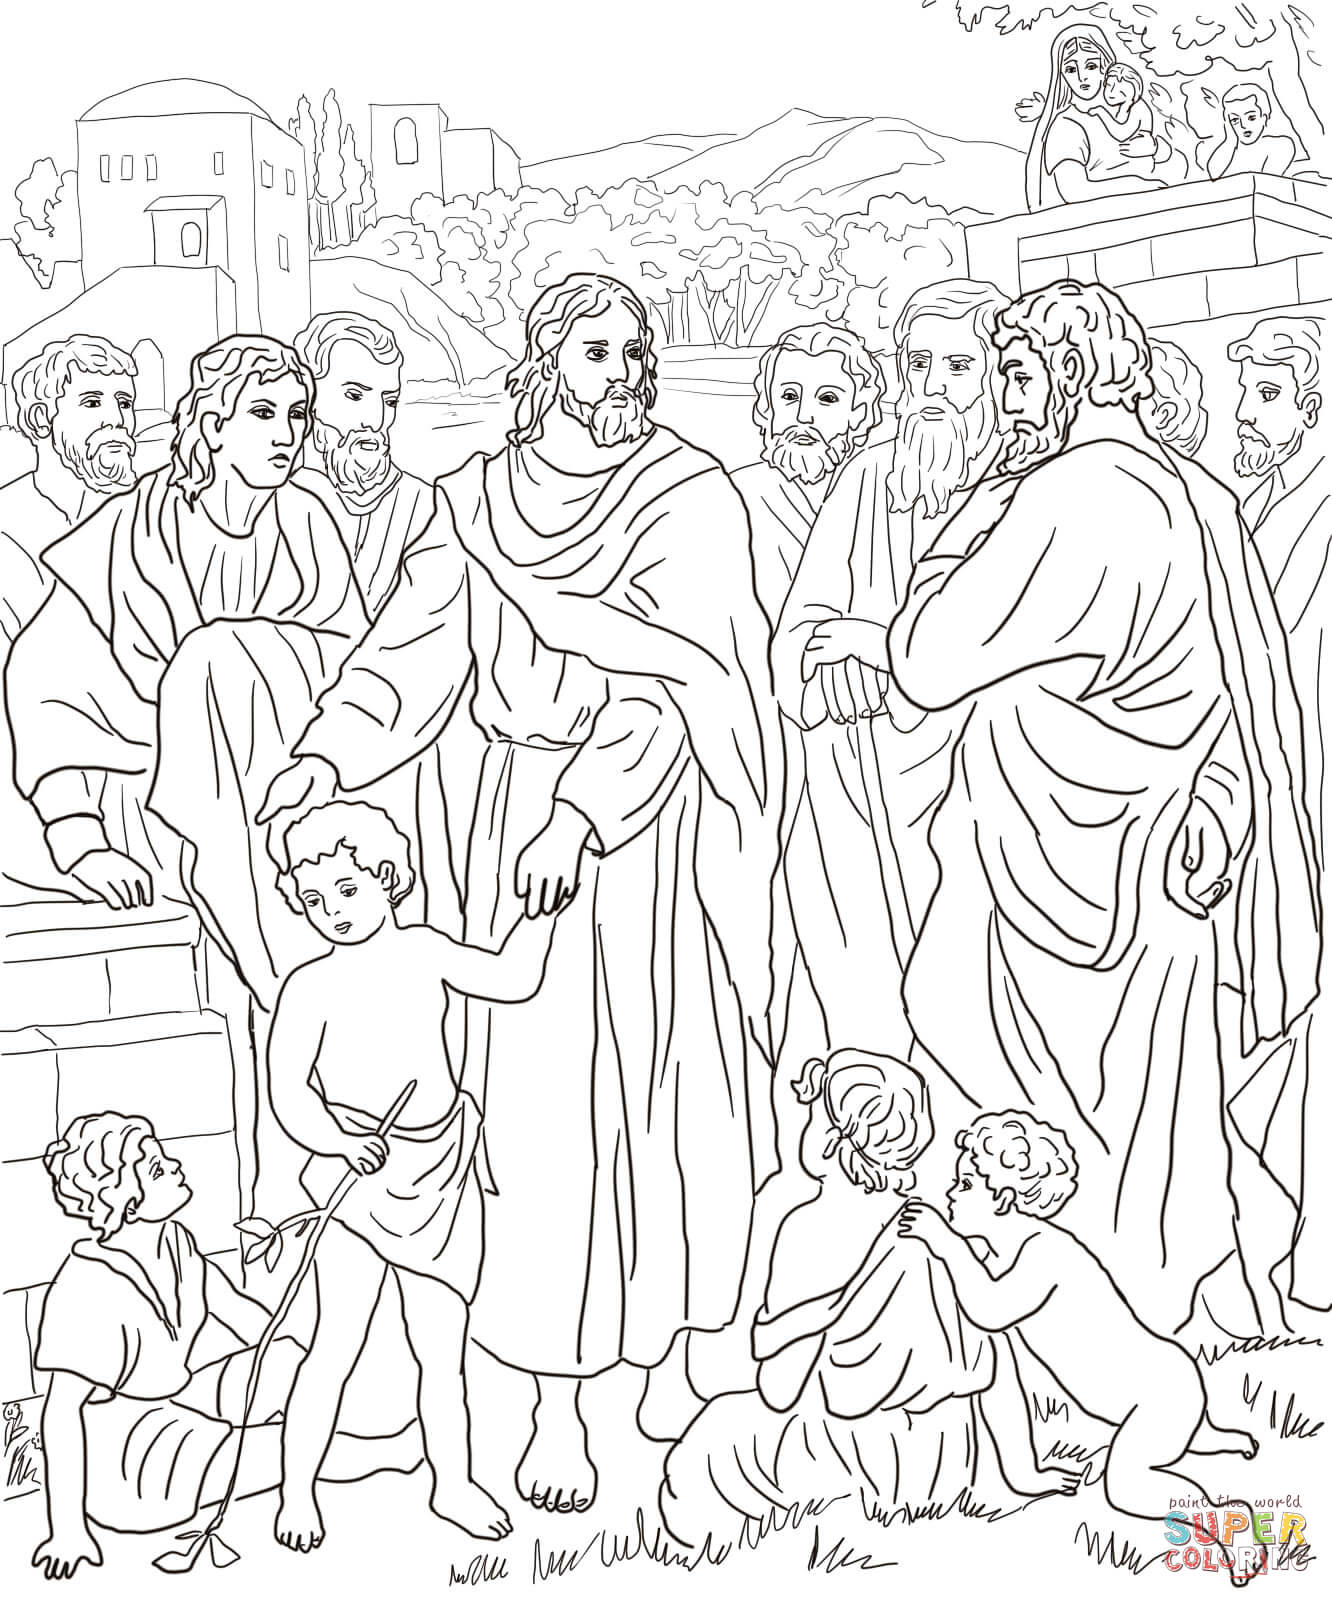 Jesus with Children coloring page | Free Printable Coloring Pages